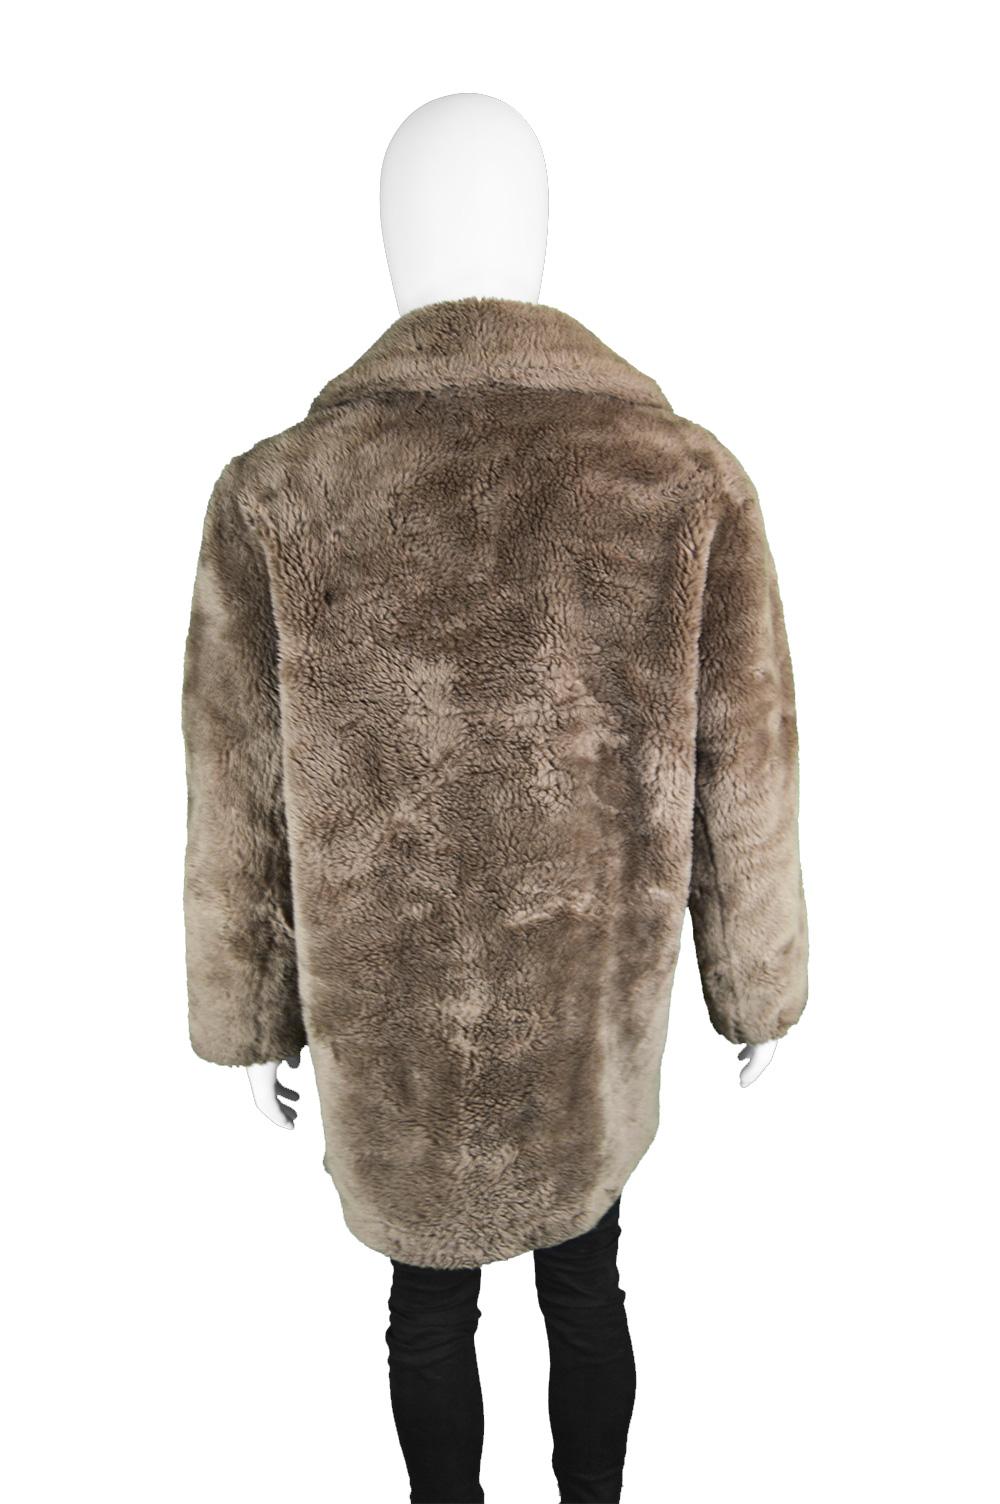 Men's Vintage Brown Faux Fur Coat with Double Breasted Buttons, 1970s im Angebot 2